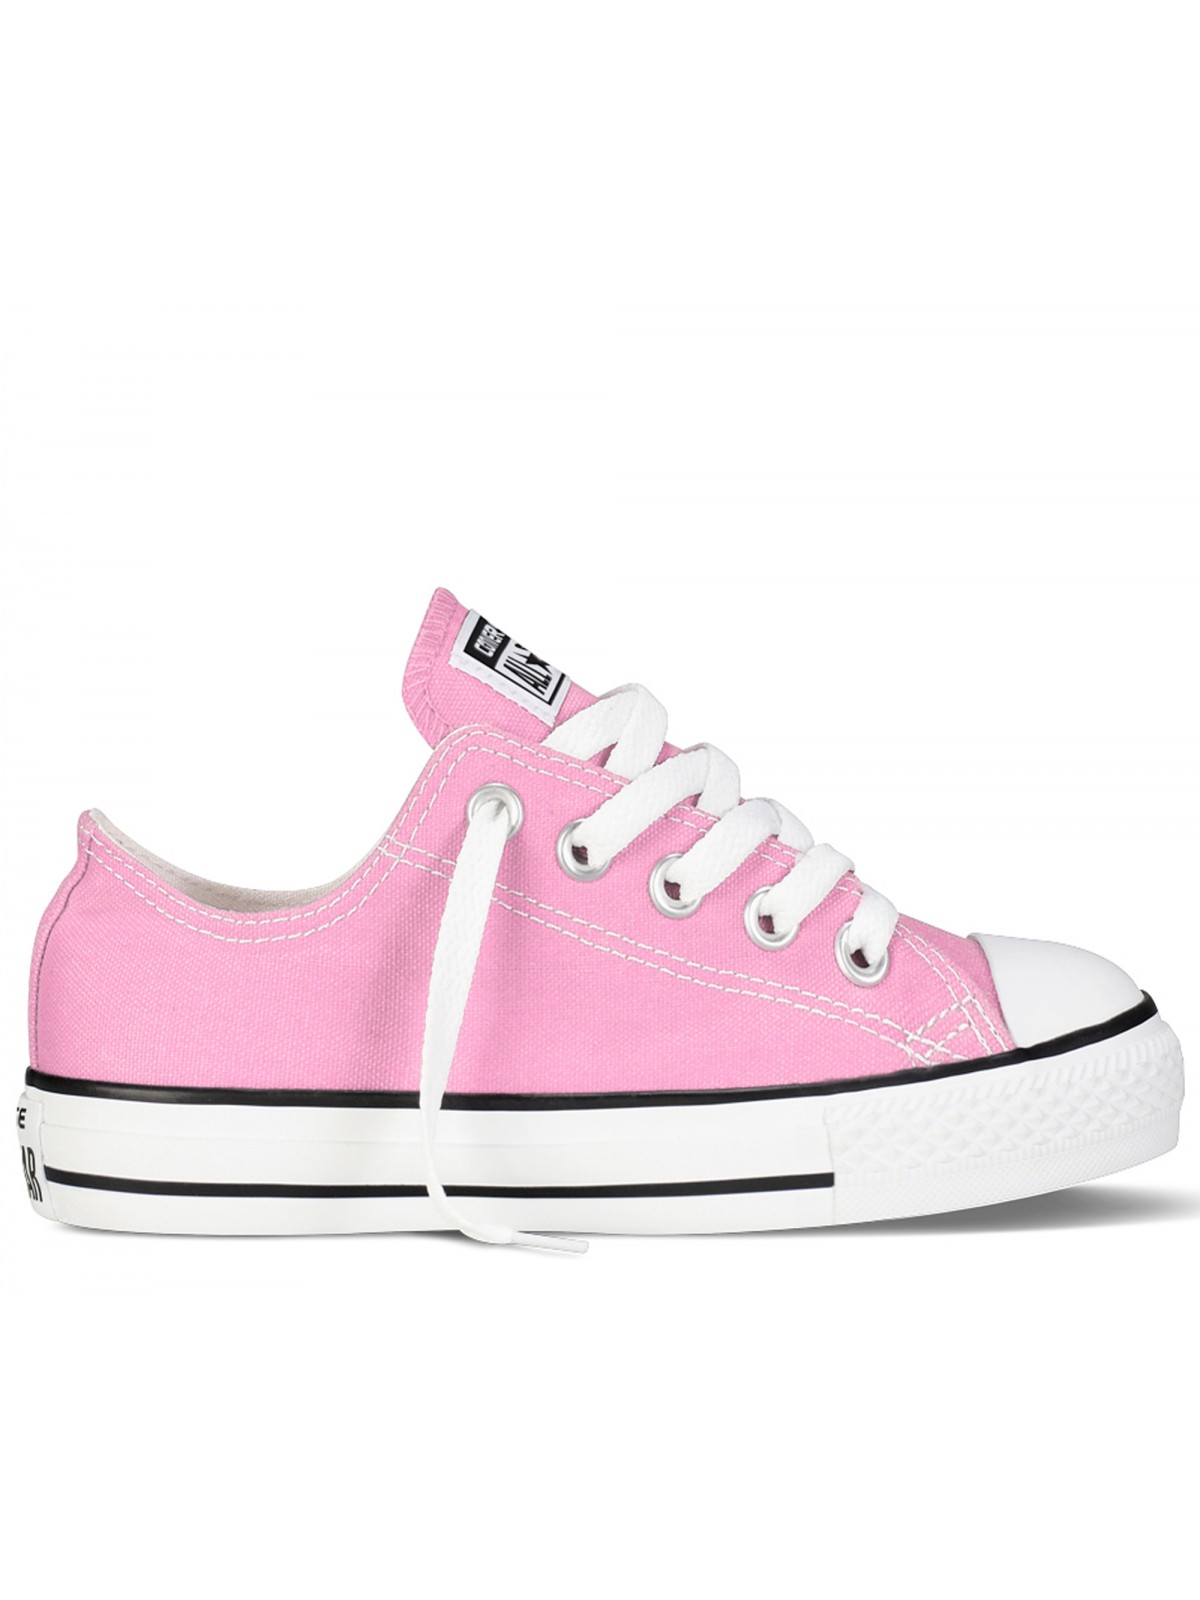 Converse Cadet Chuck Taylor all star toile basse pink